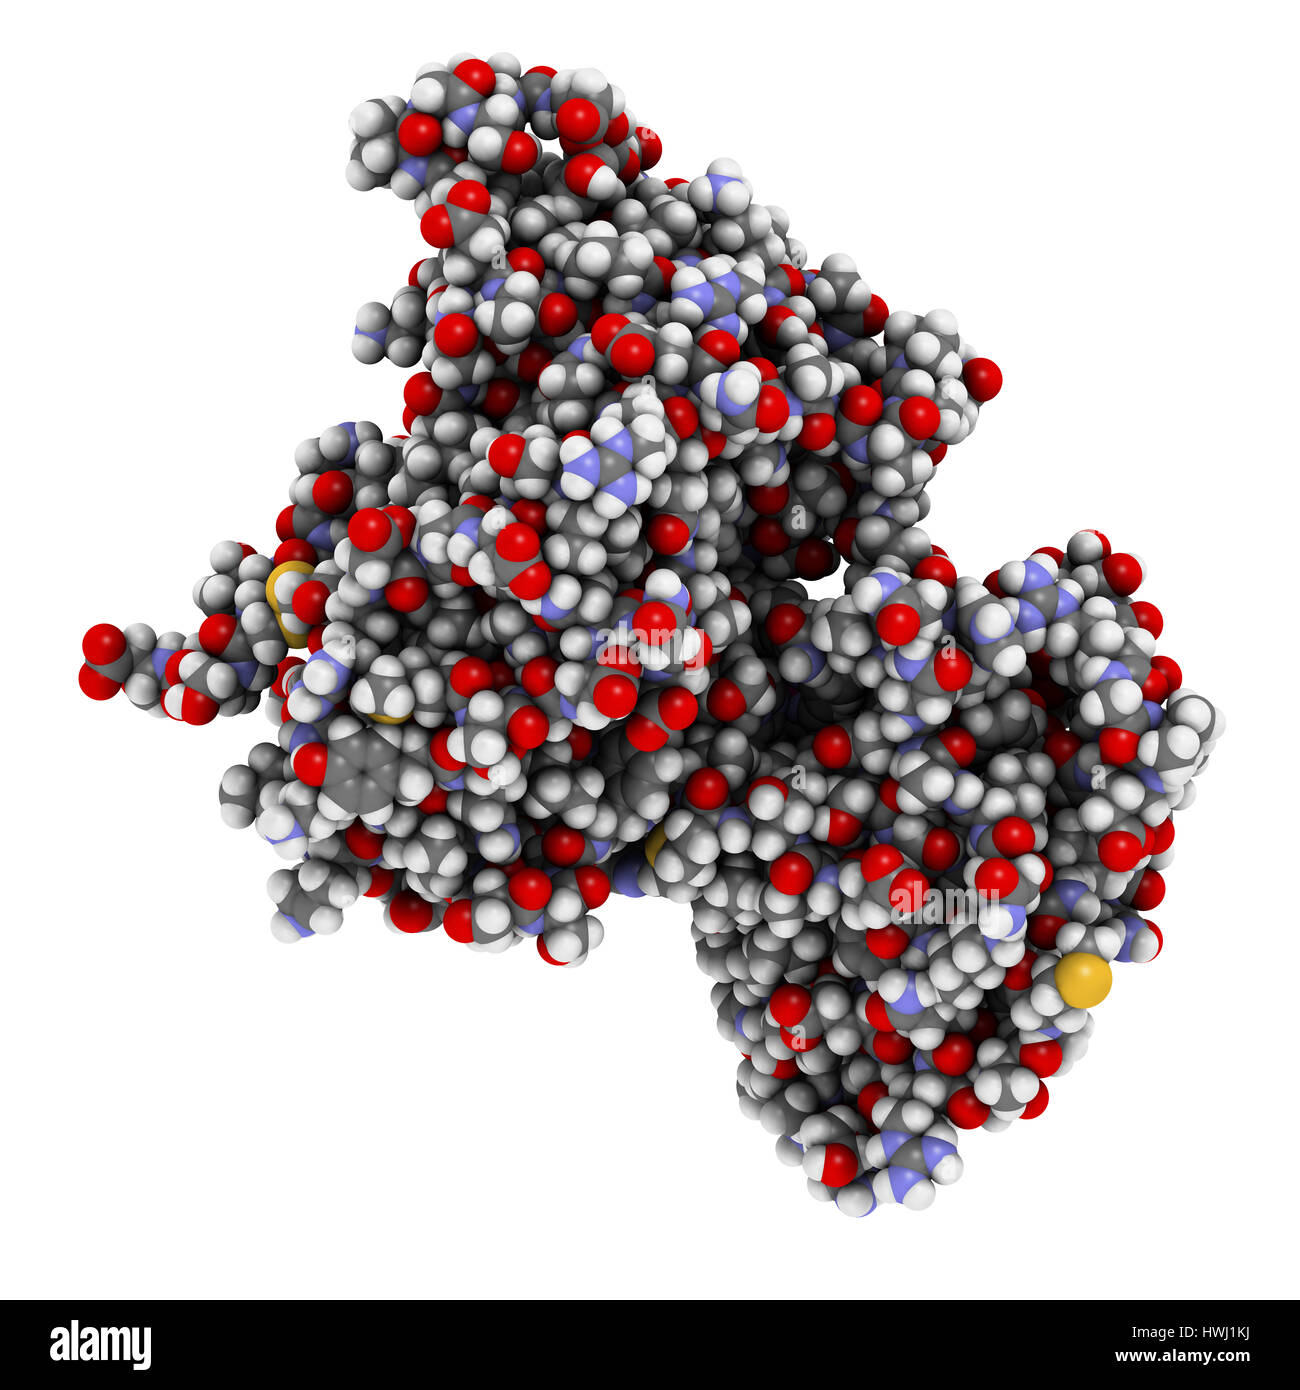 Intrinsic factor (IF) protein. Glycoprotein produced in the stomach, necessary for absorption of vitamin B12 (cobalamin). 3D illustration. Atoms shown Stock Photo